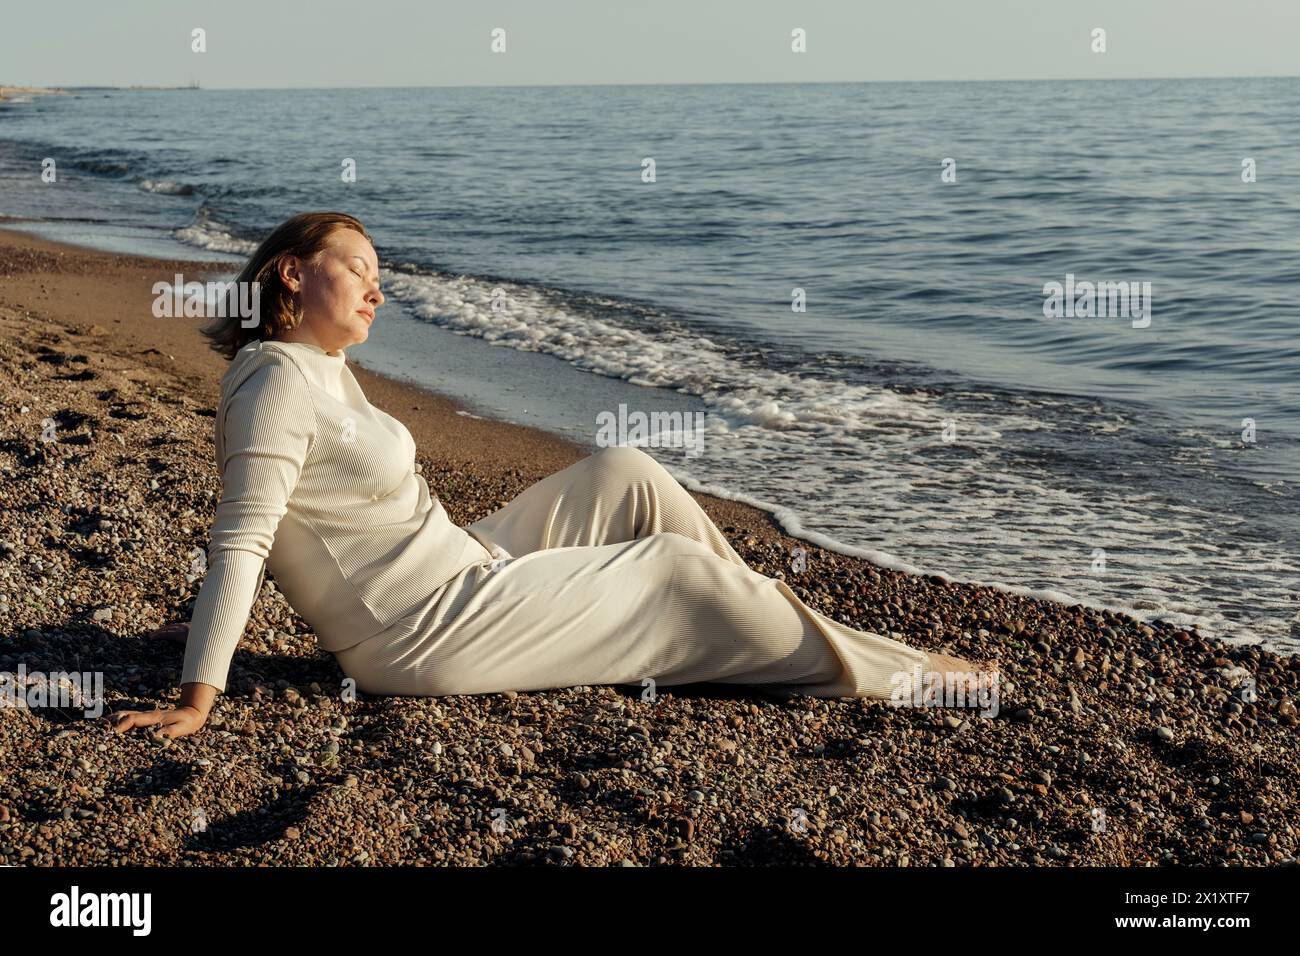 A woman is seated on a sandy beach, next to the ocean, with waves gently lapping the shore in the background. Stock Photo